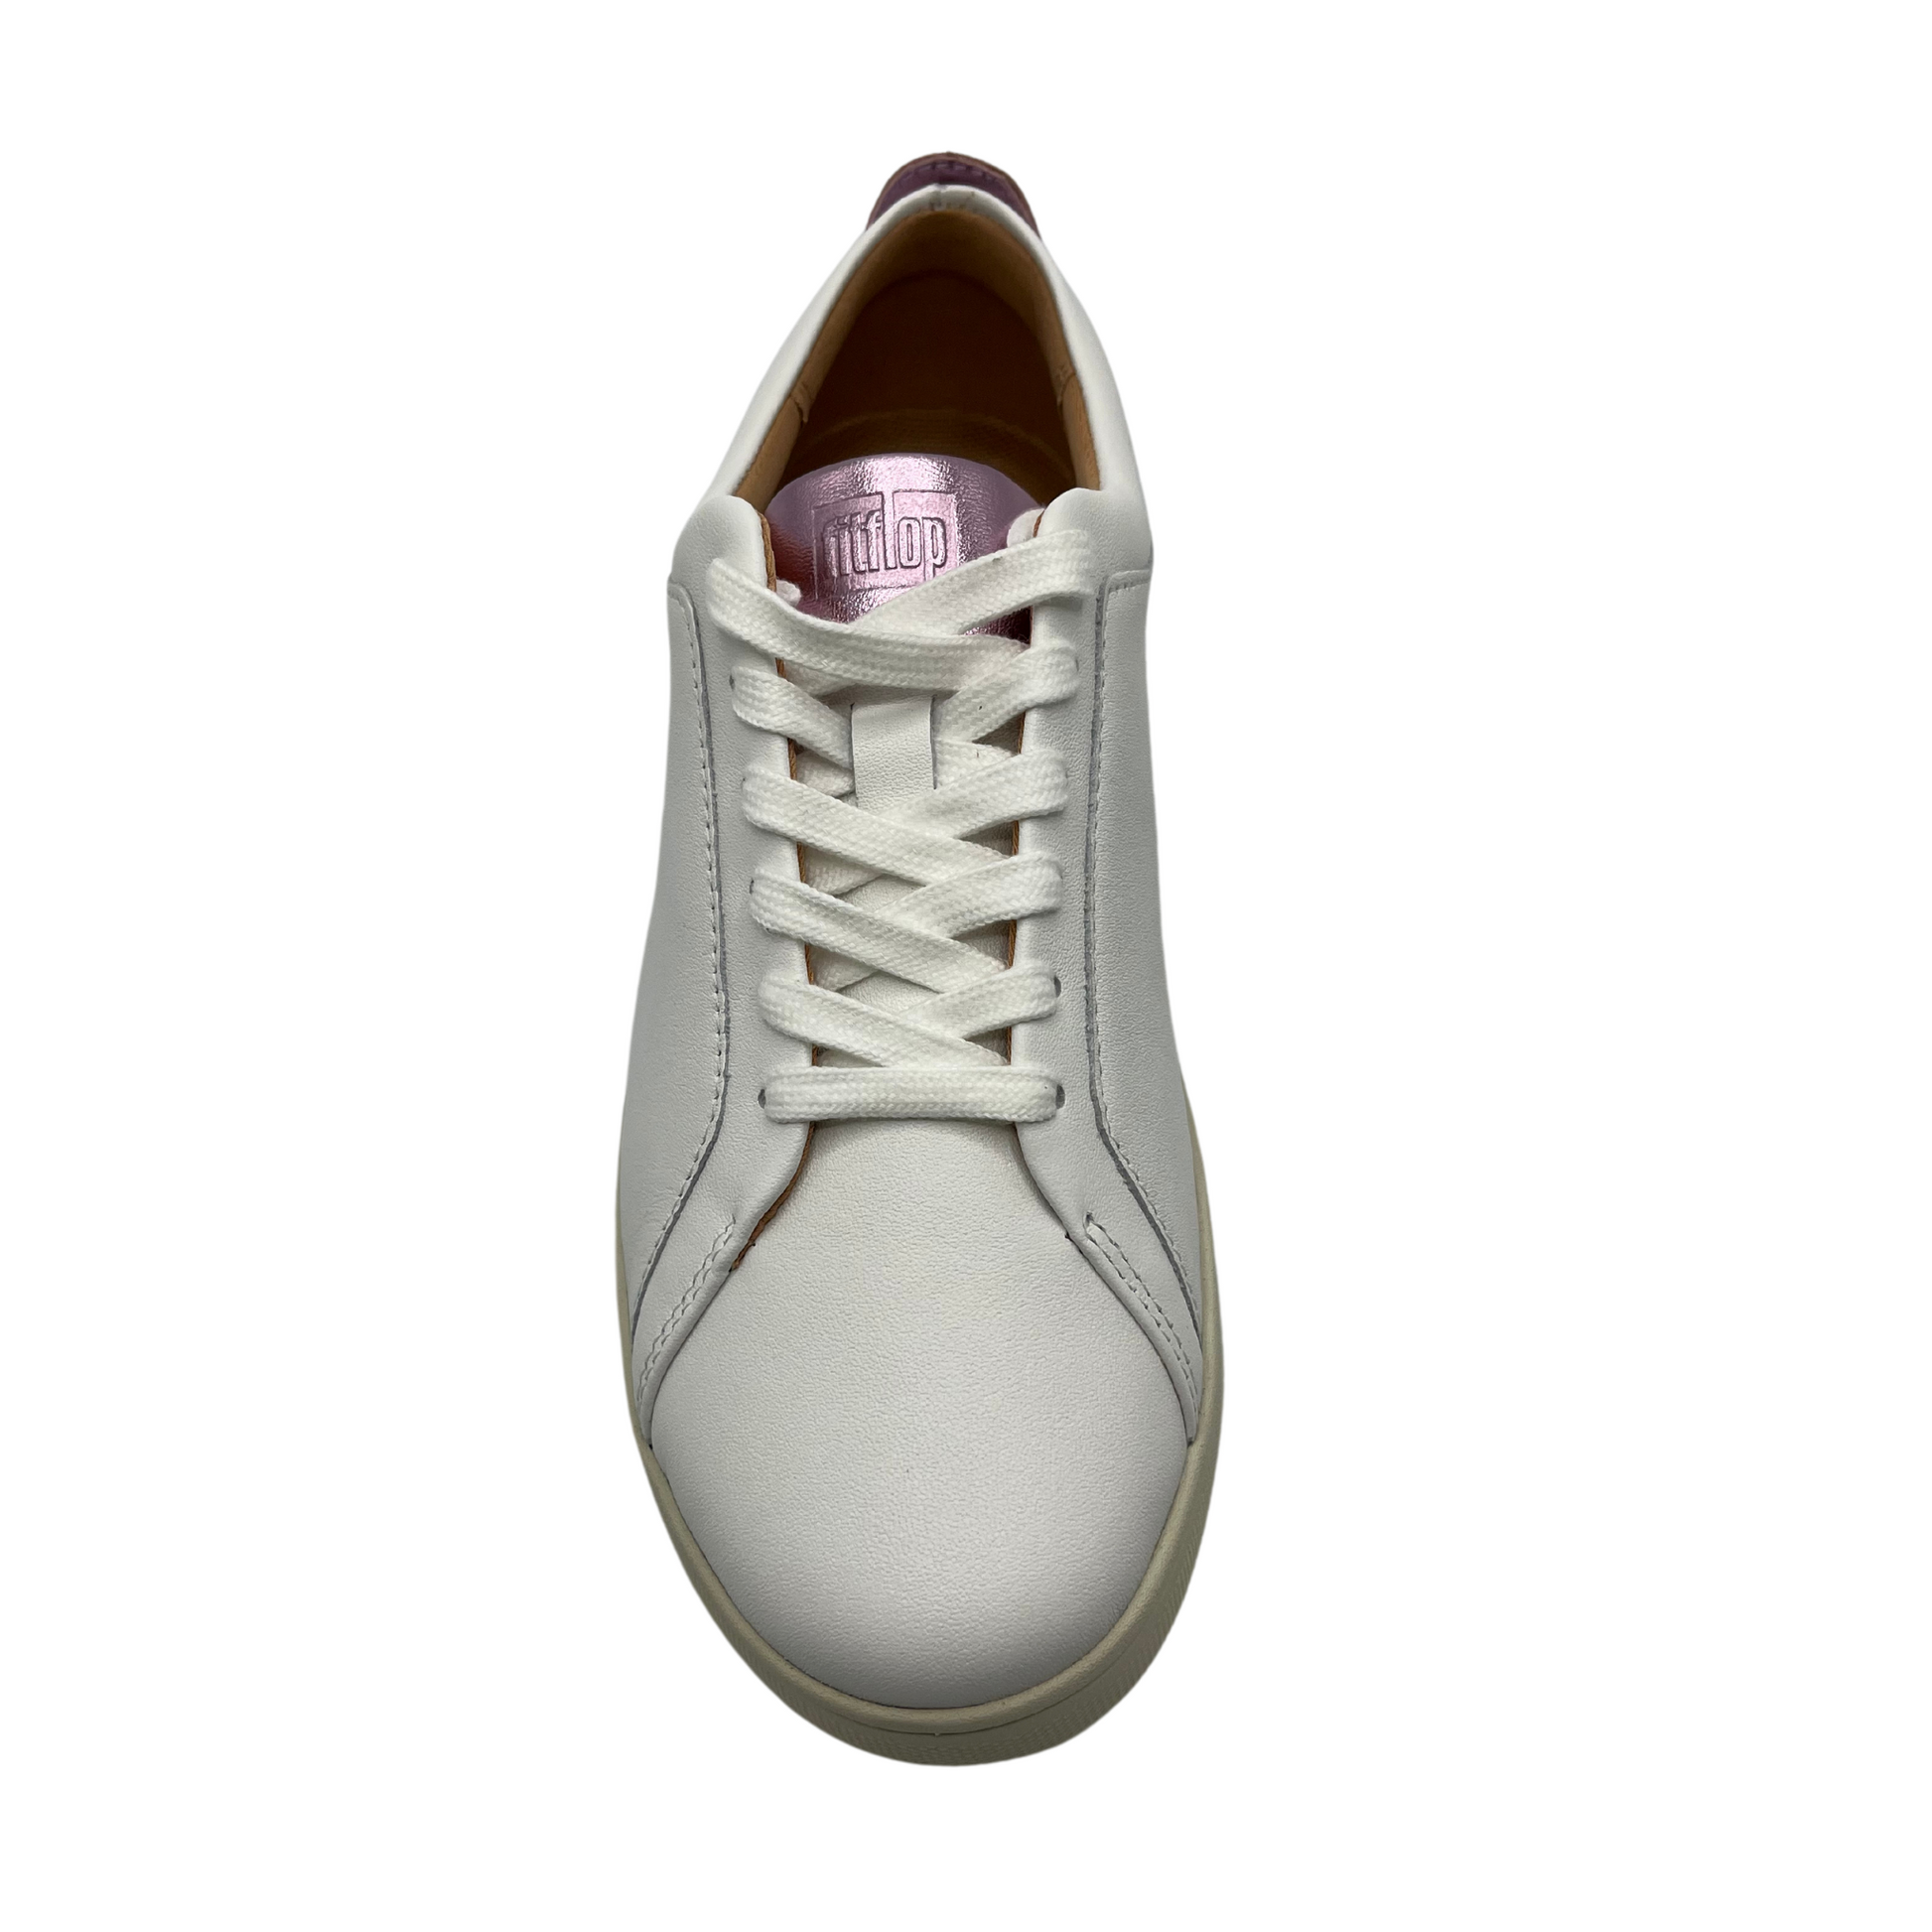 Top view of white leather sneakers with white laces, rubber outsole and metallic lilac detail on heel